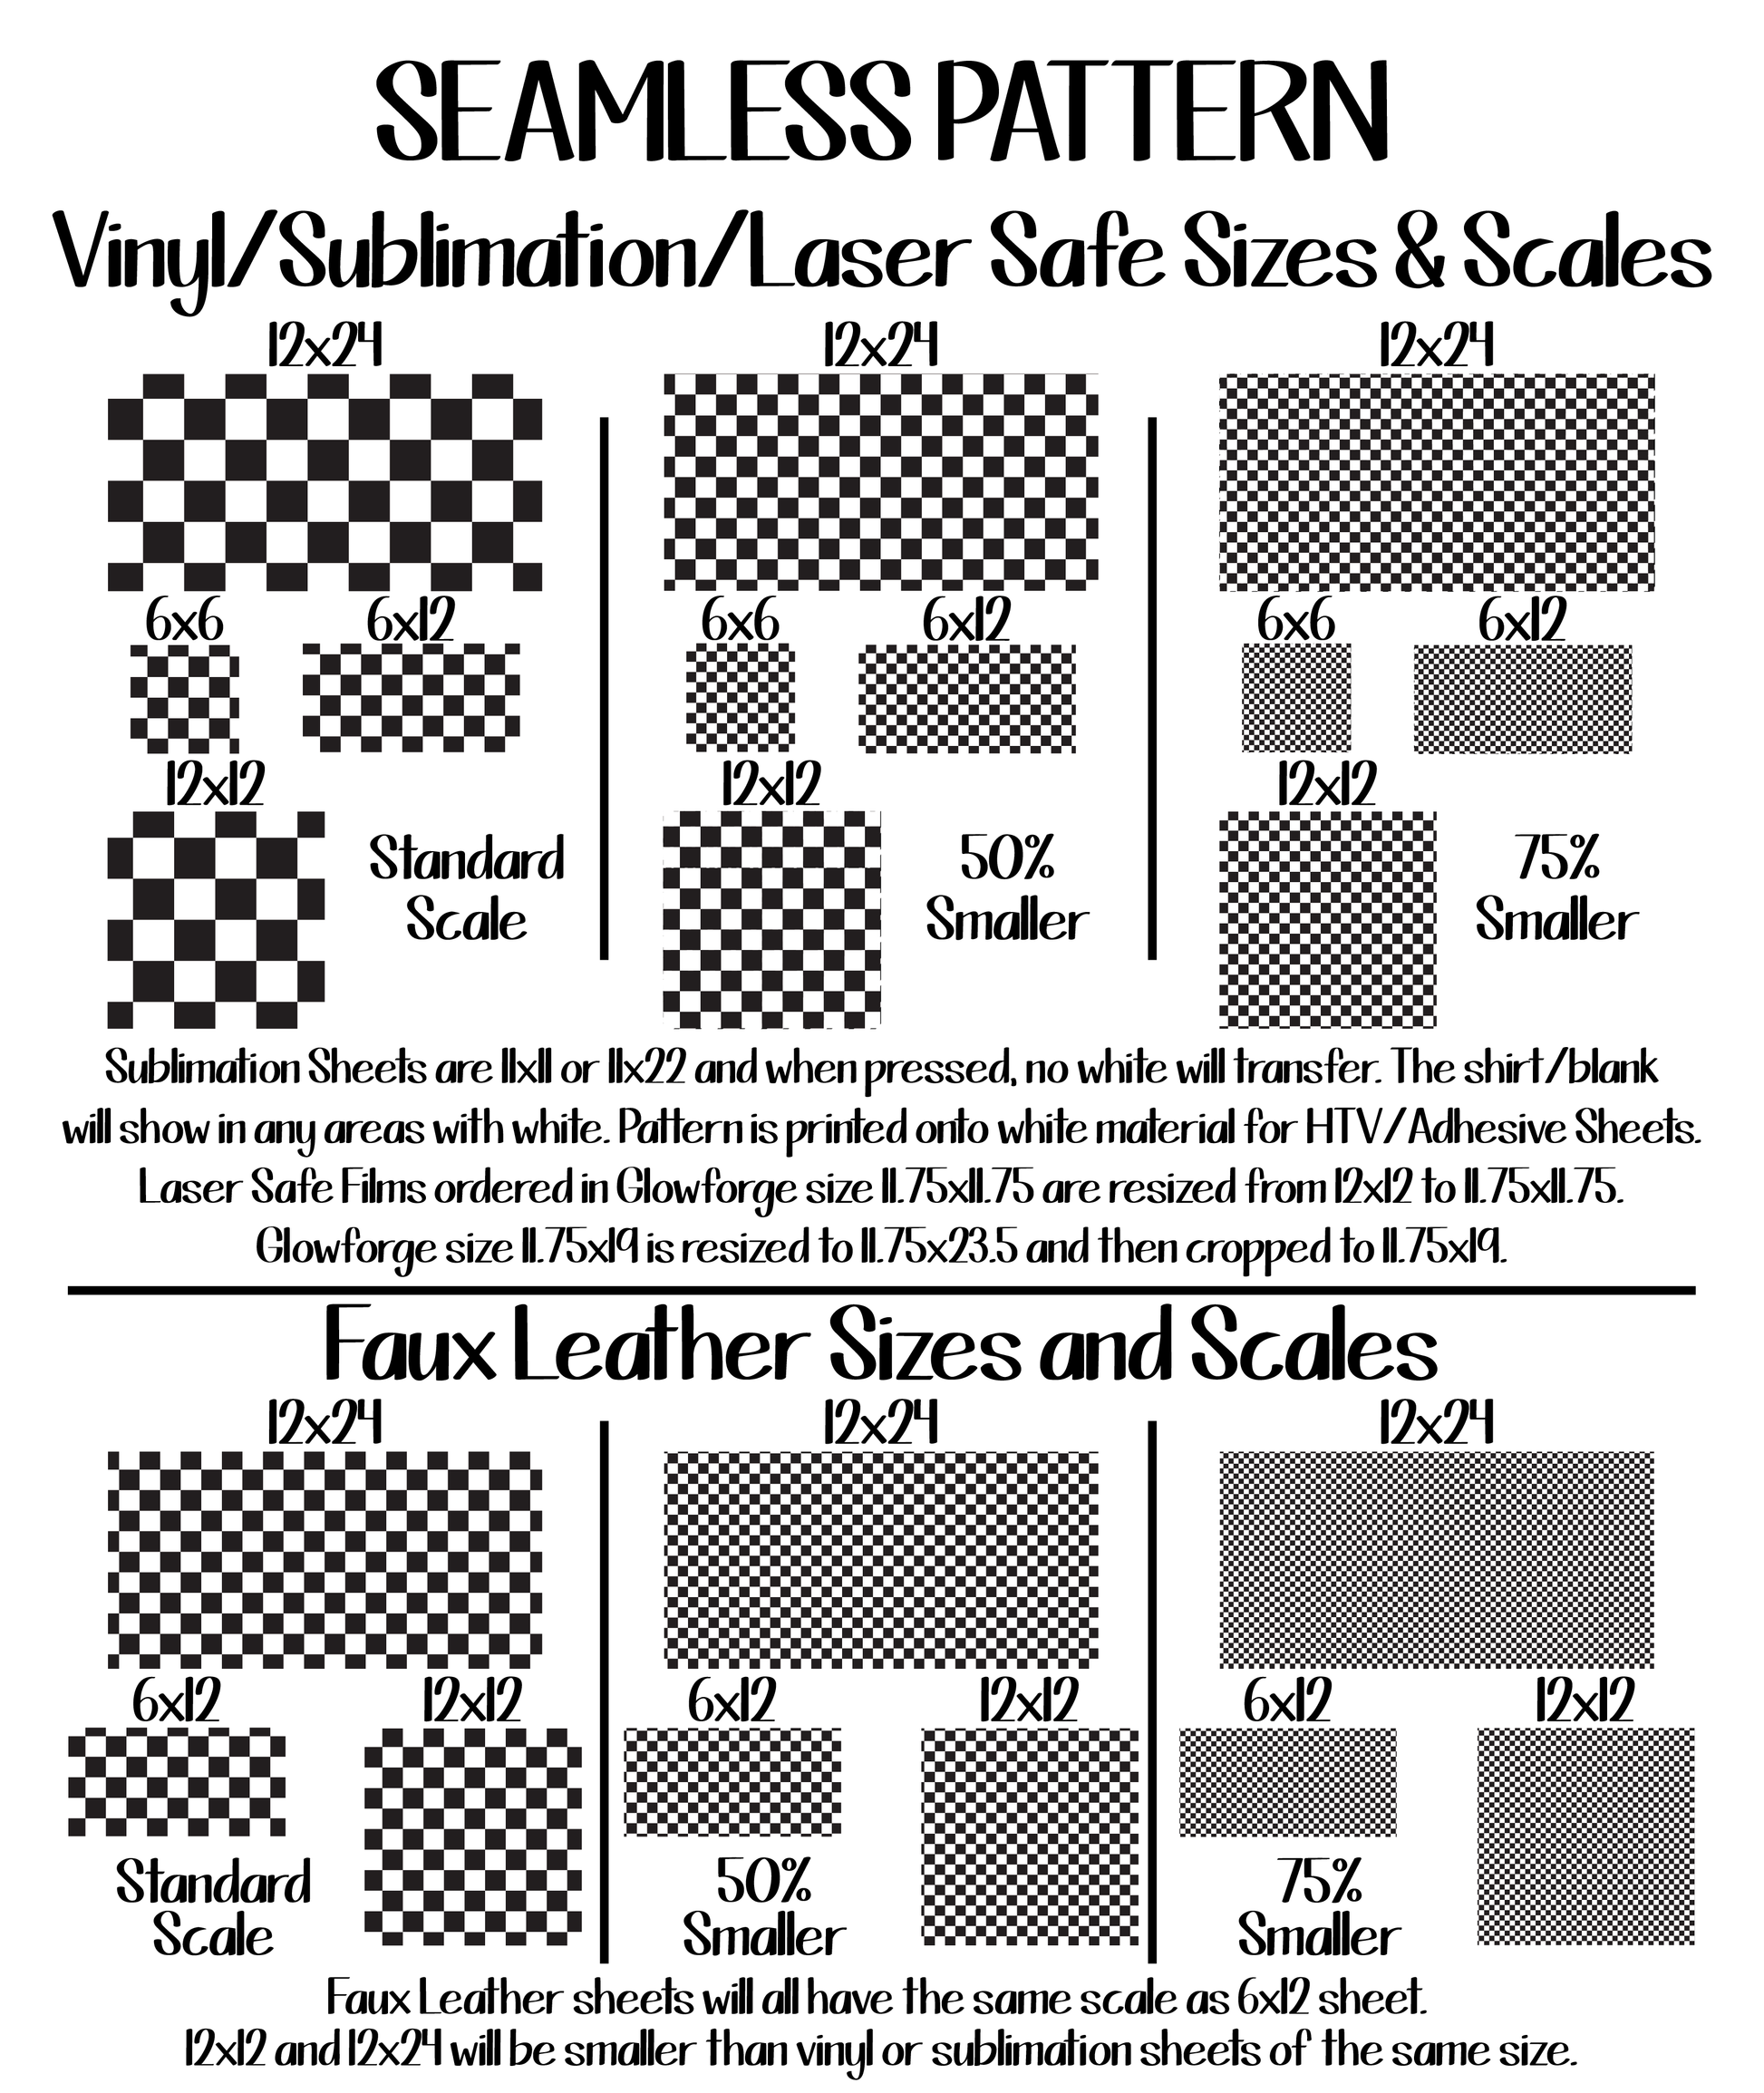 Sublimation Puzzle Blanks - Extra Thick Polyester